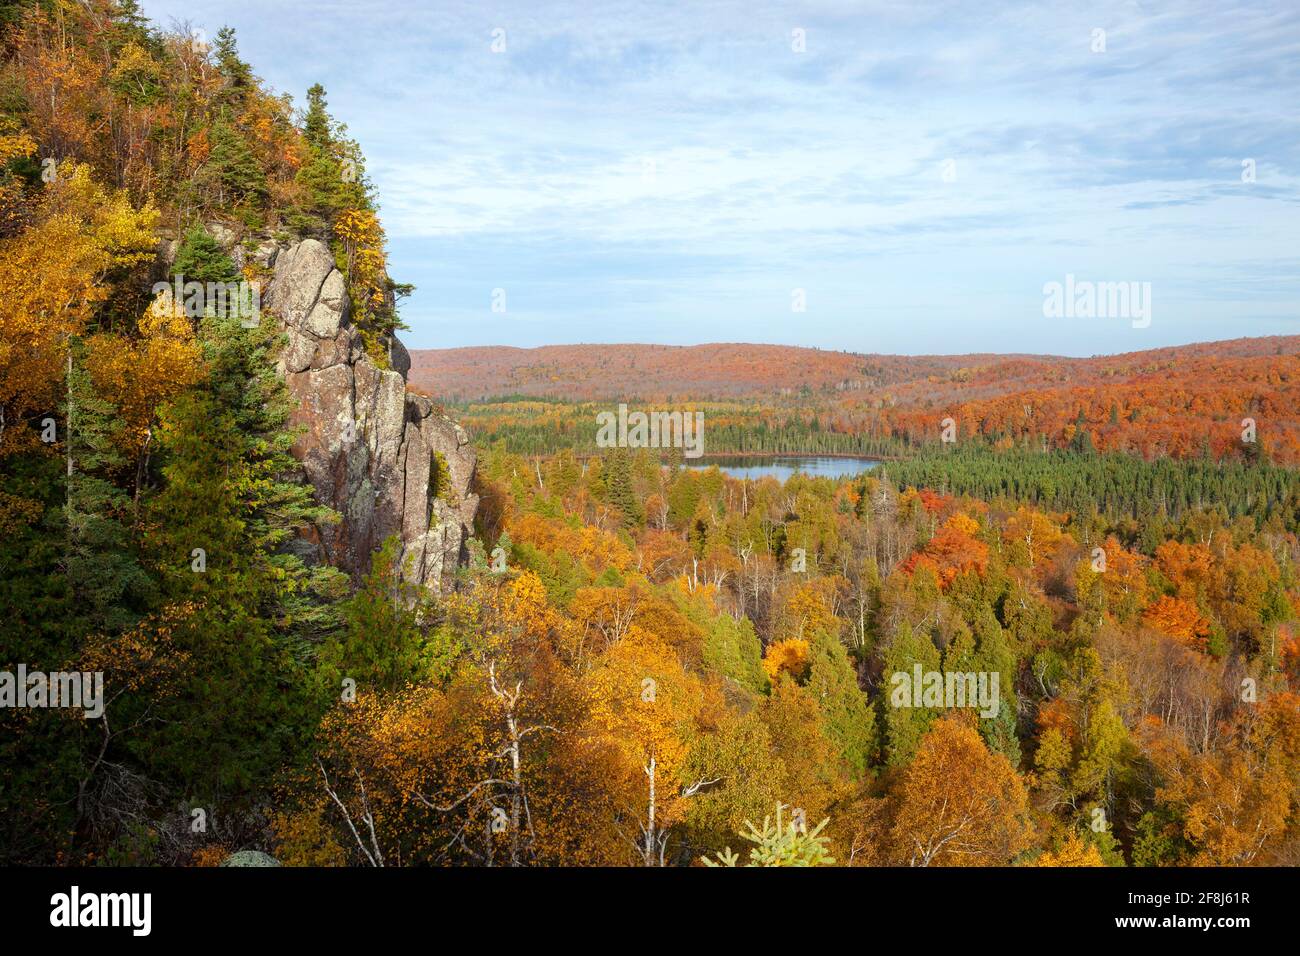 Cliff and small lake surrounded by trees in autumn color in northern Minnesota Stock Photo